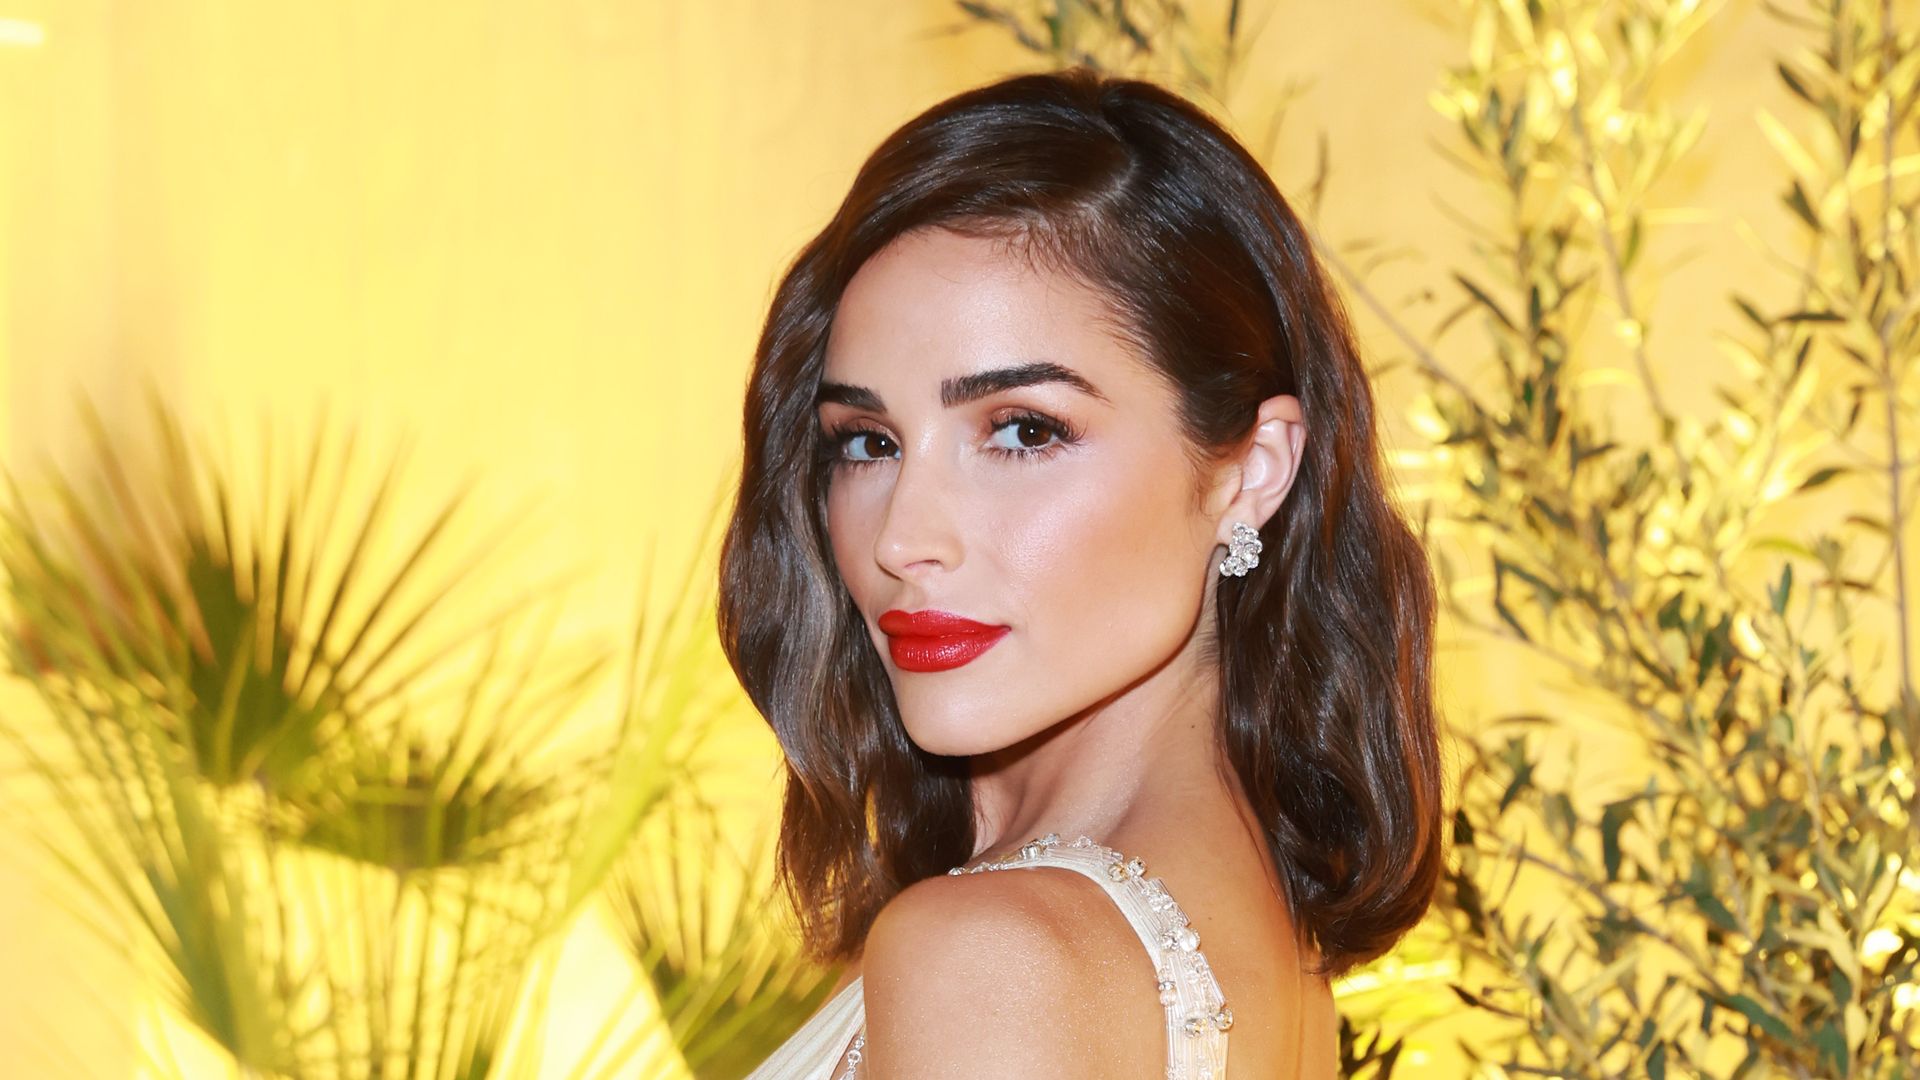 Olivia Culpo attends the Fashion Trust Arabia Prize 2022 Awards Ceremony at The National Museum of Qatar on October 26, 2022 in Doha, Qatar